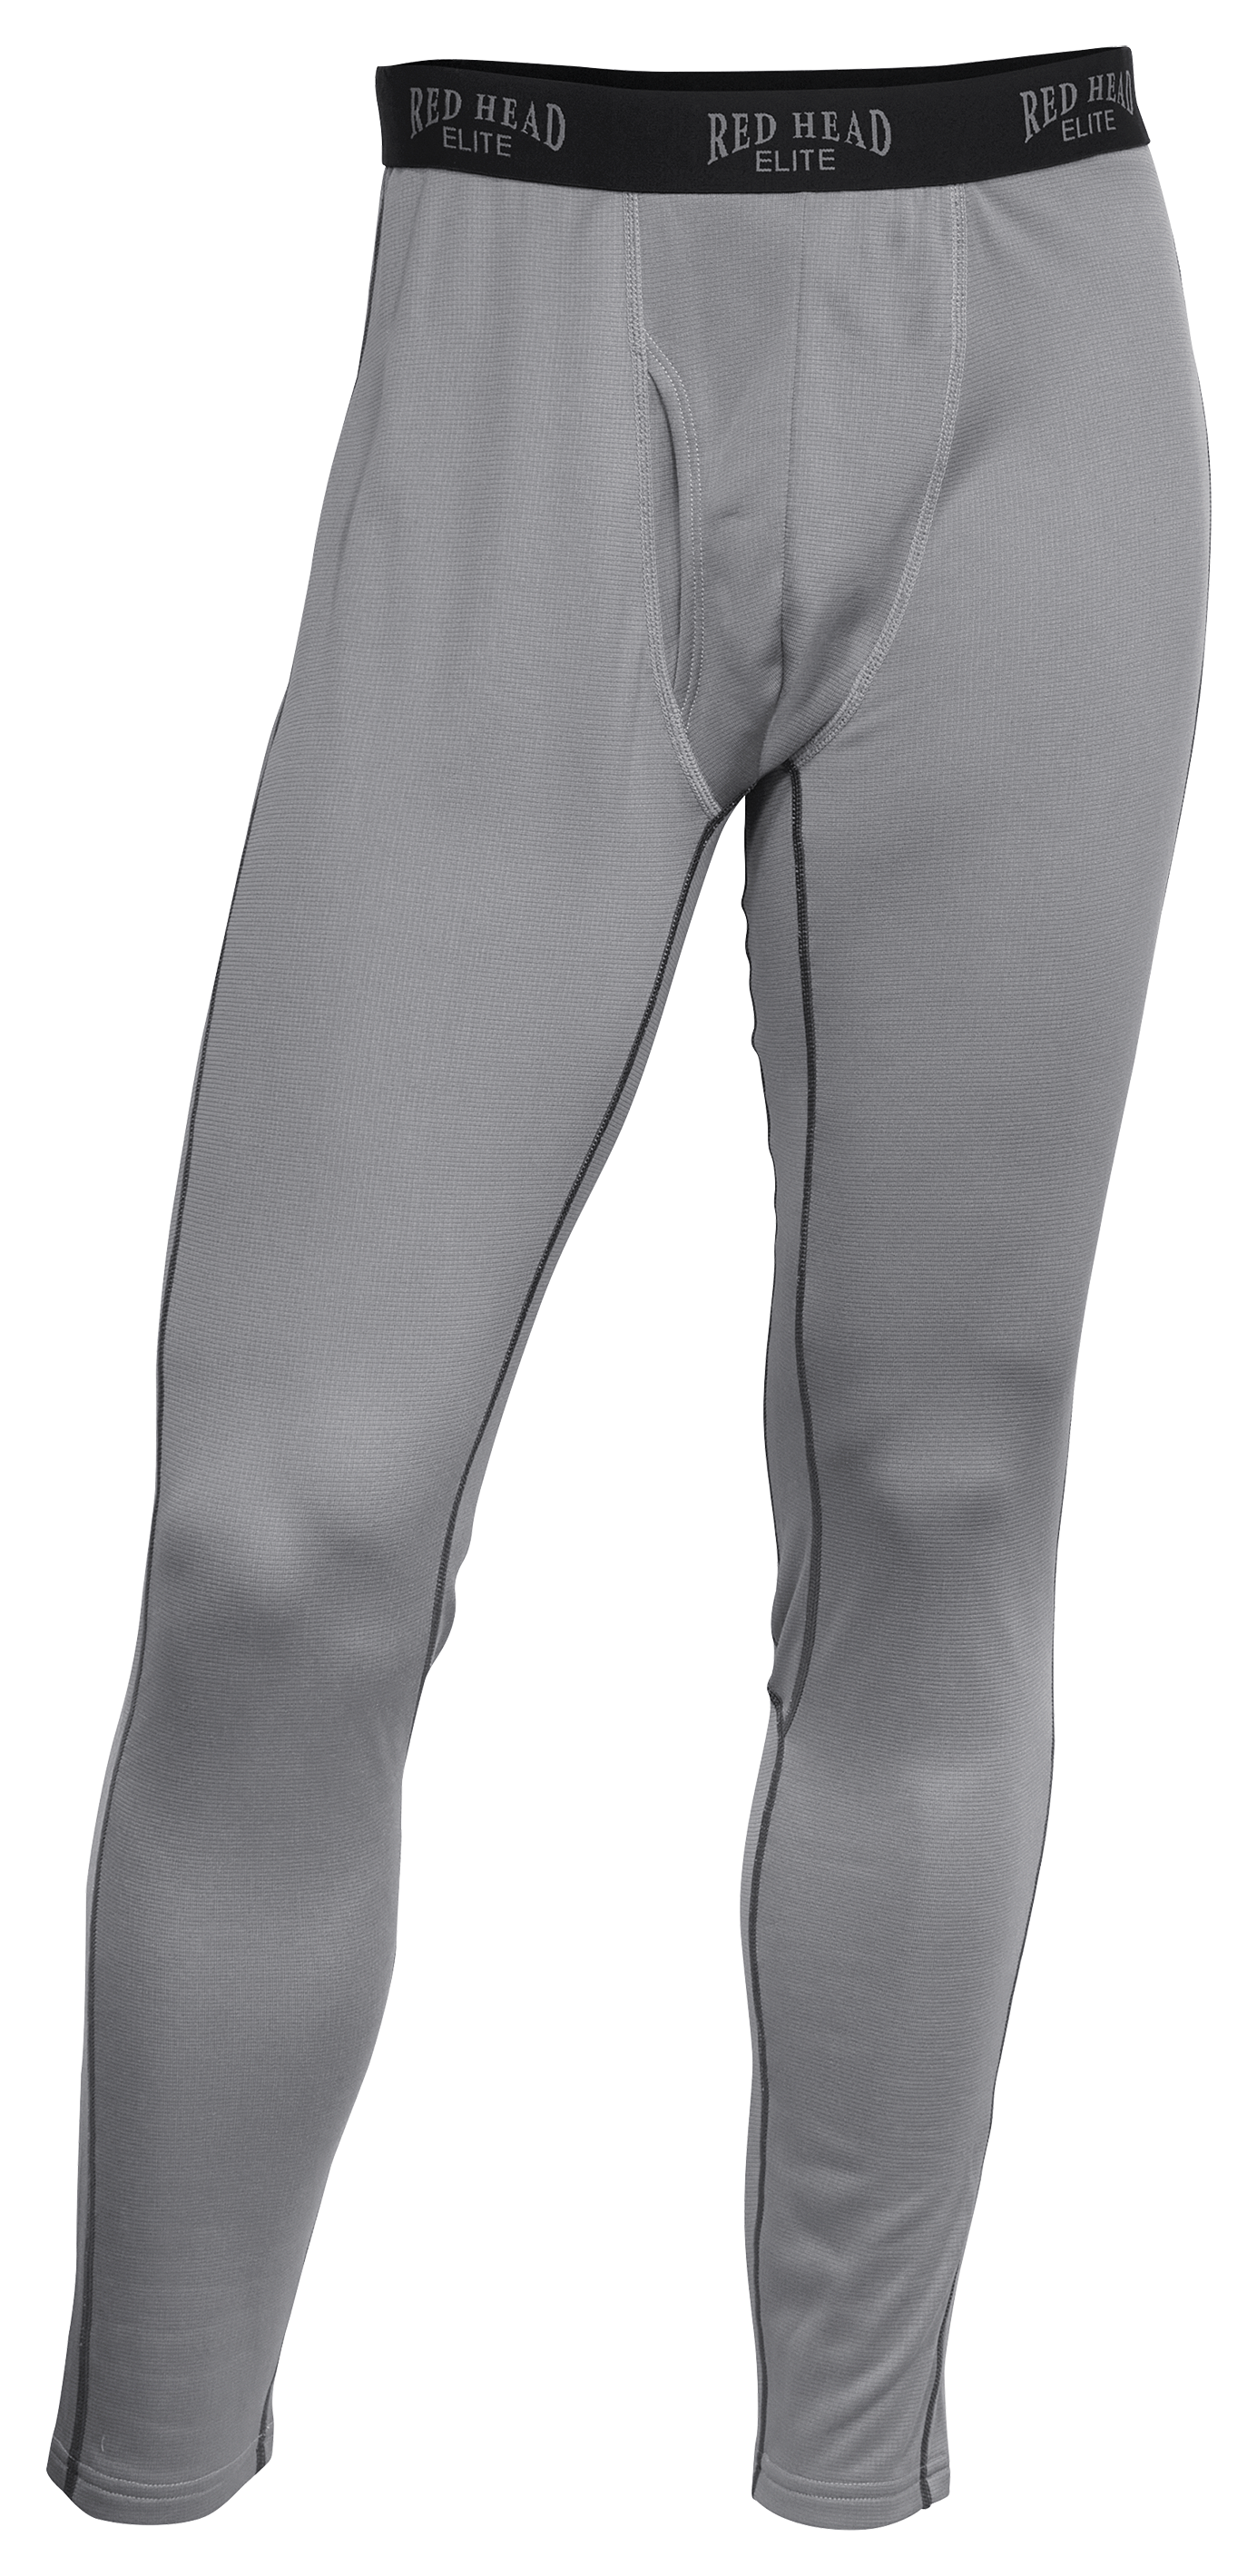 New Balance Men's Compression Thermal Non-Rolling Baselayer Pants